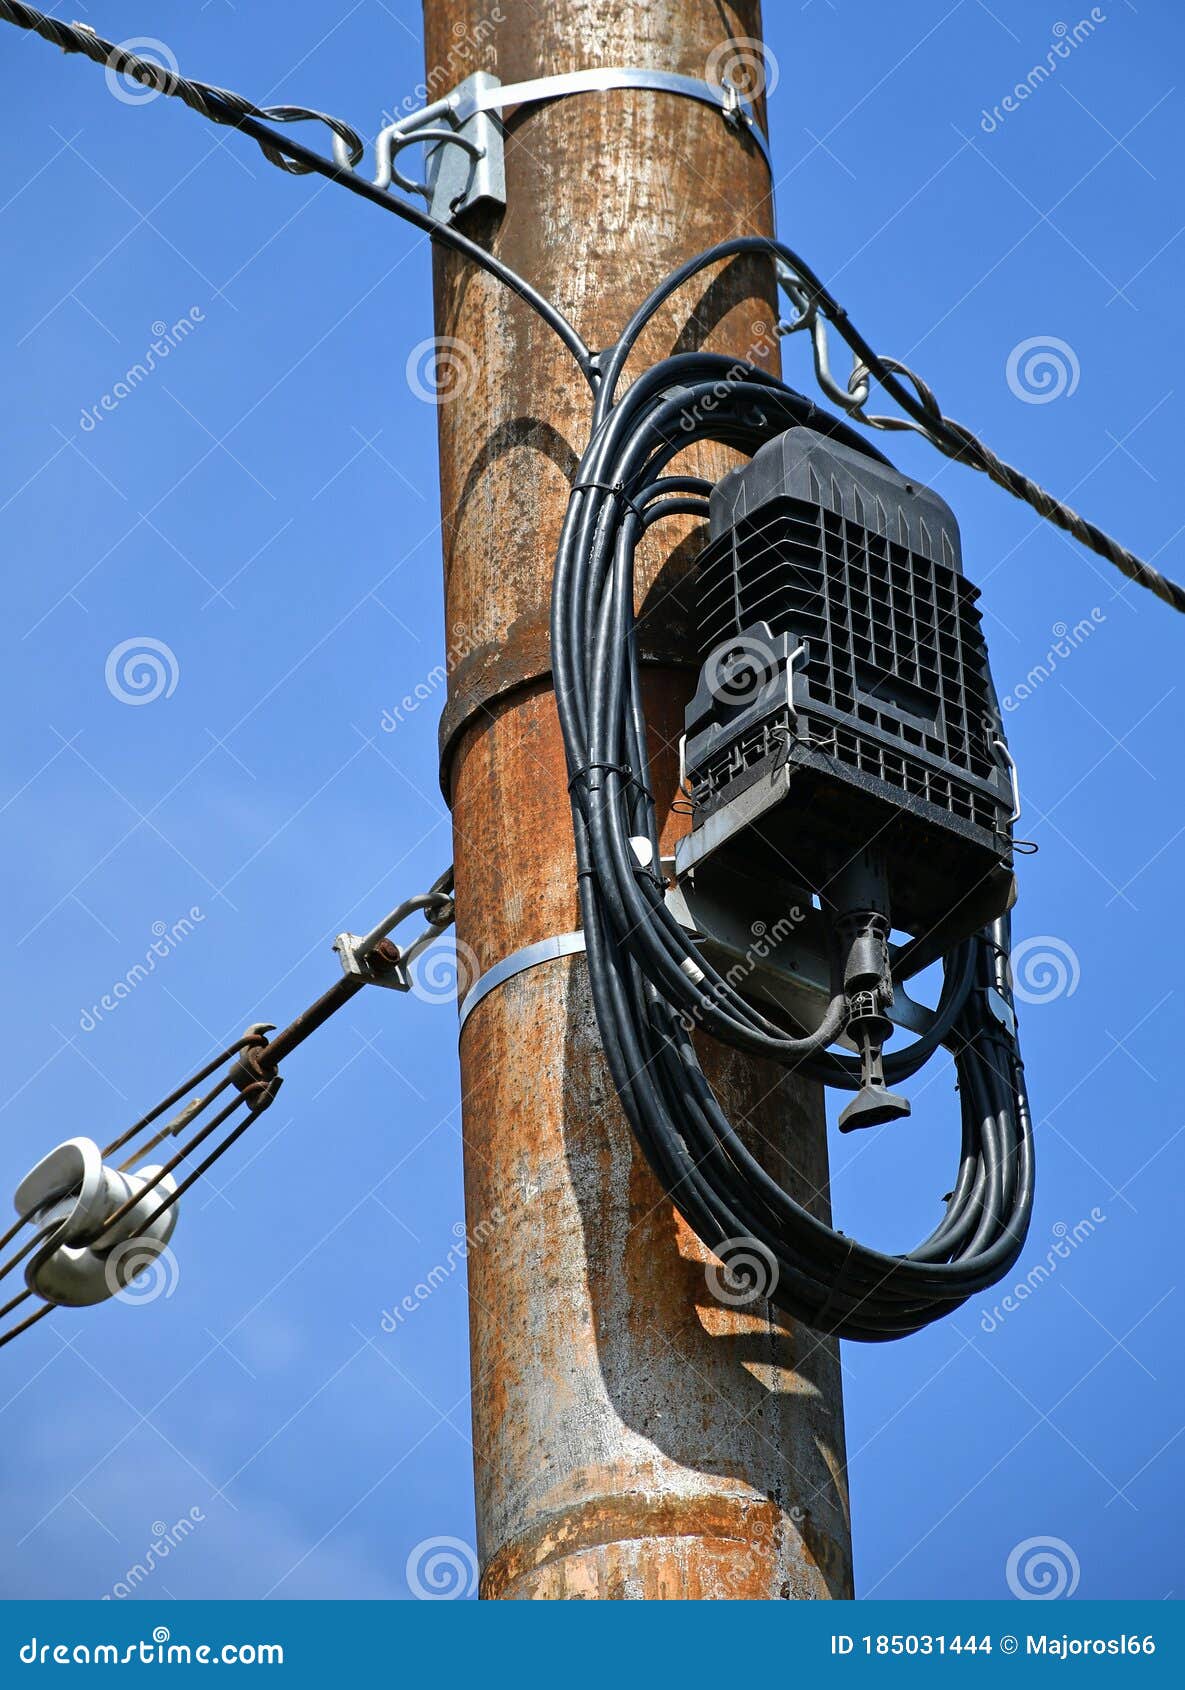 Internet Router on an Pole Stock Photo Image of telecommunication, router: